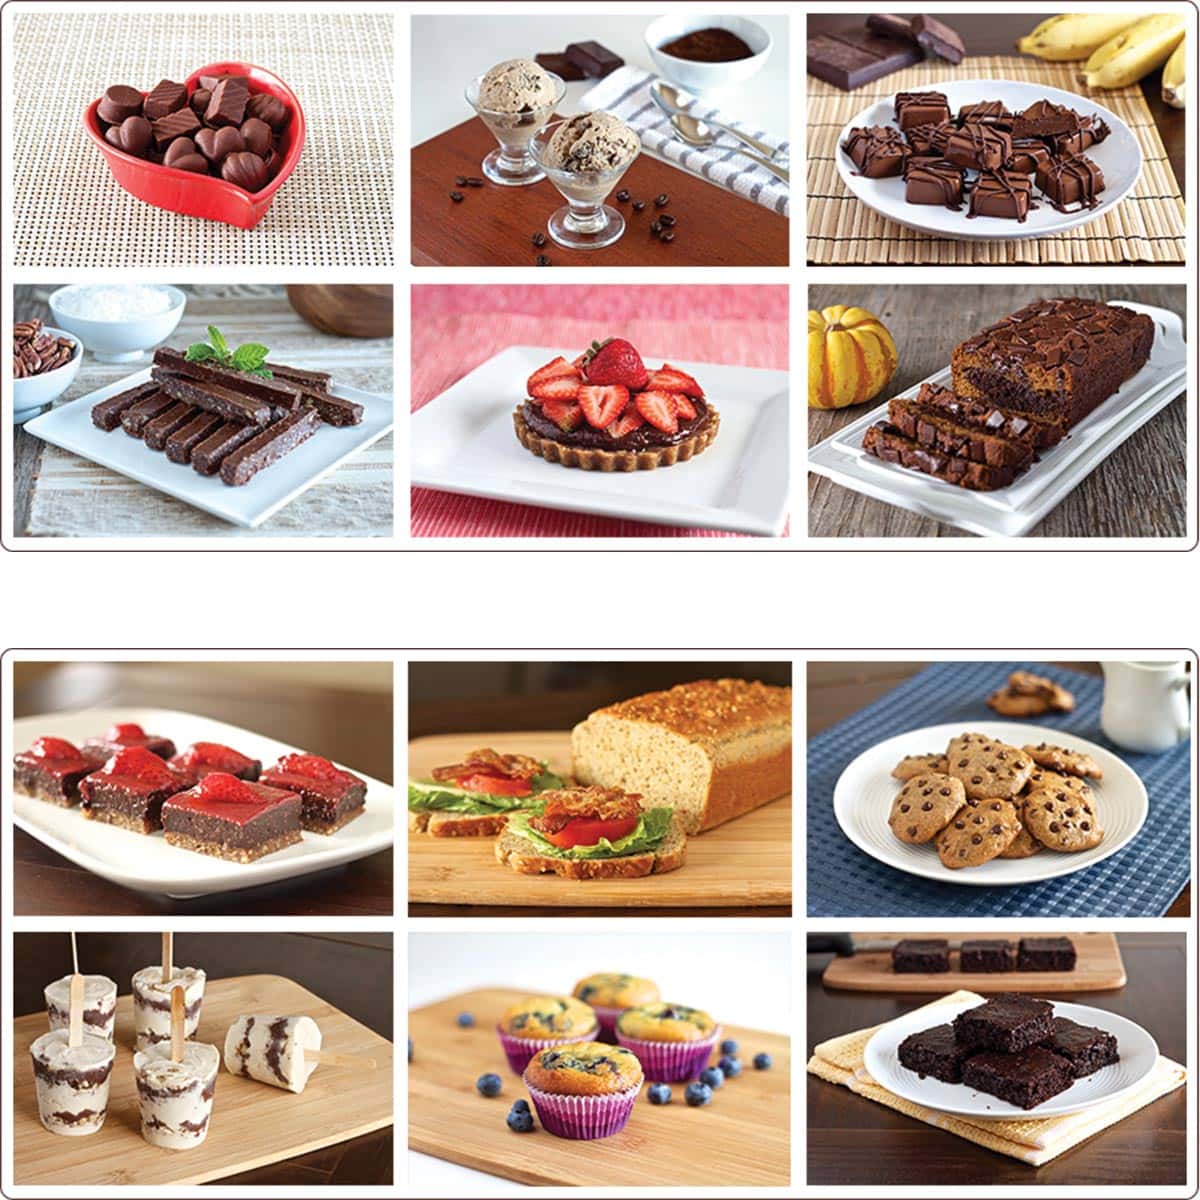 several different desserts included in the cookbook